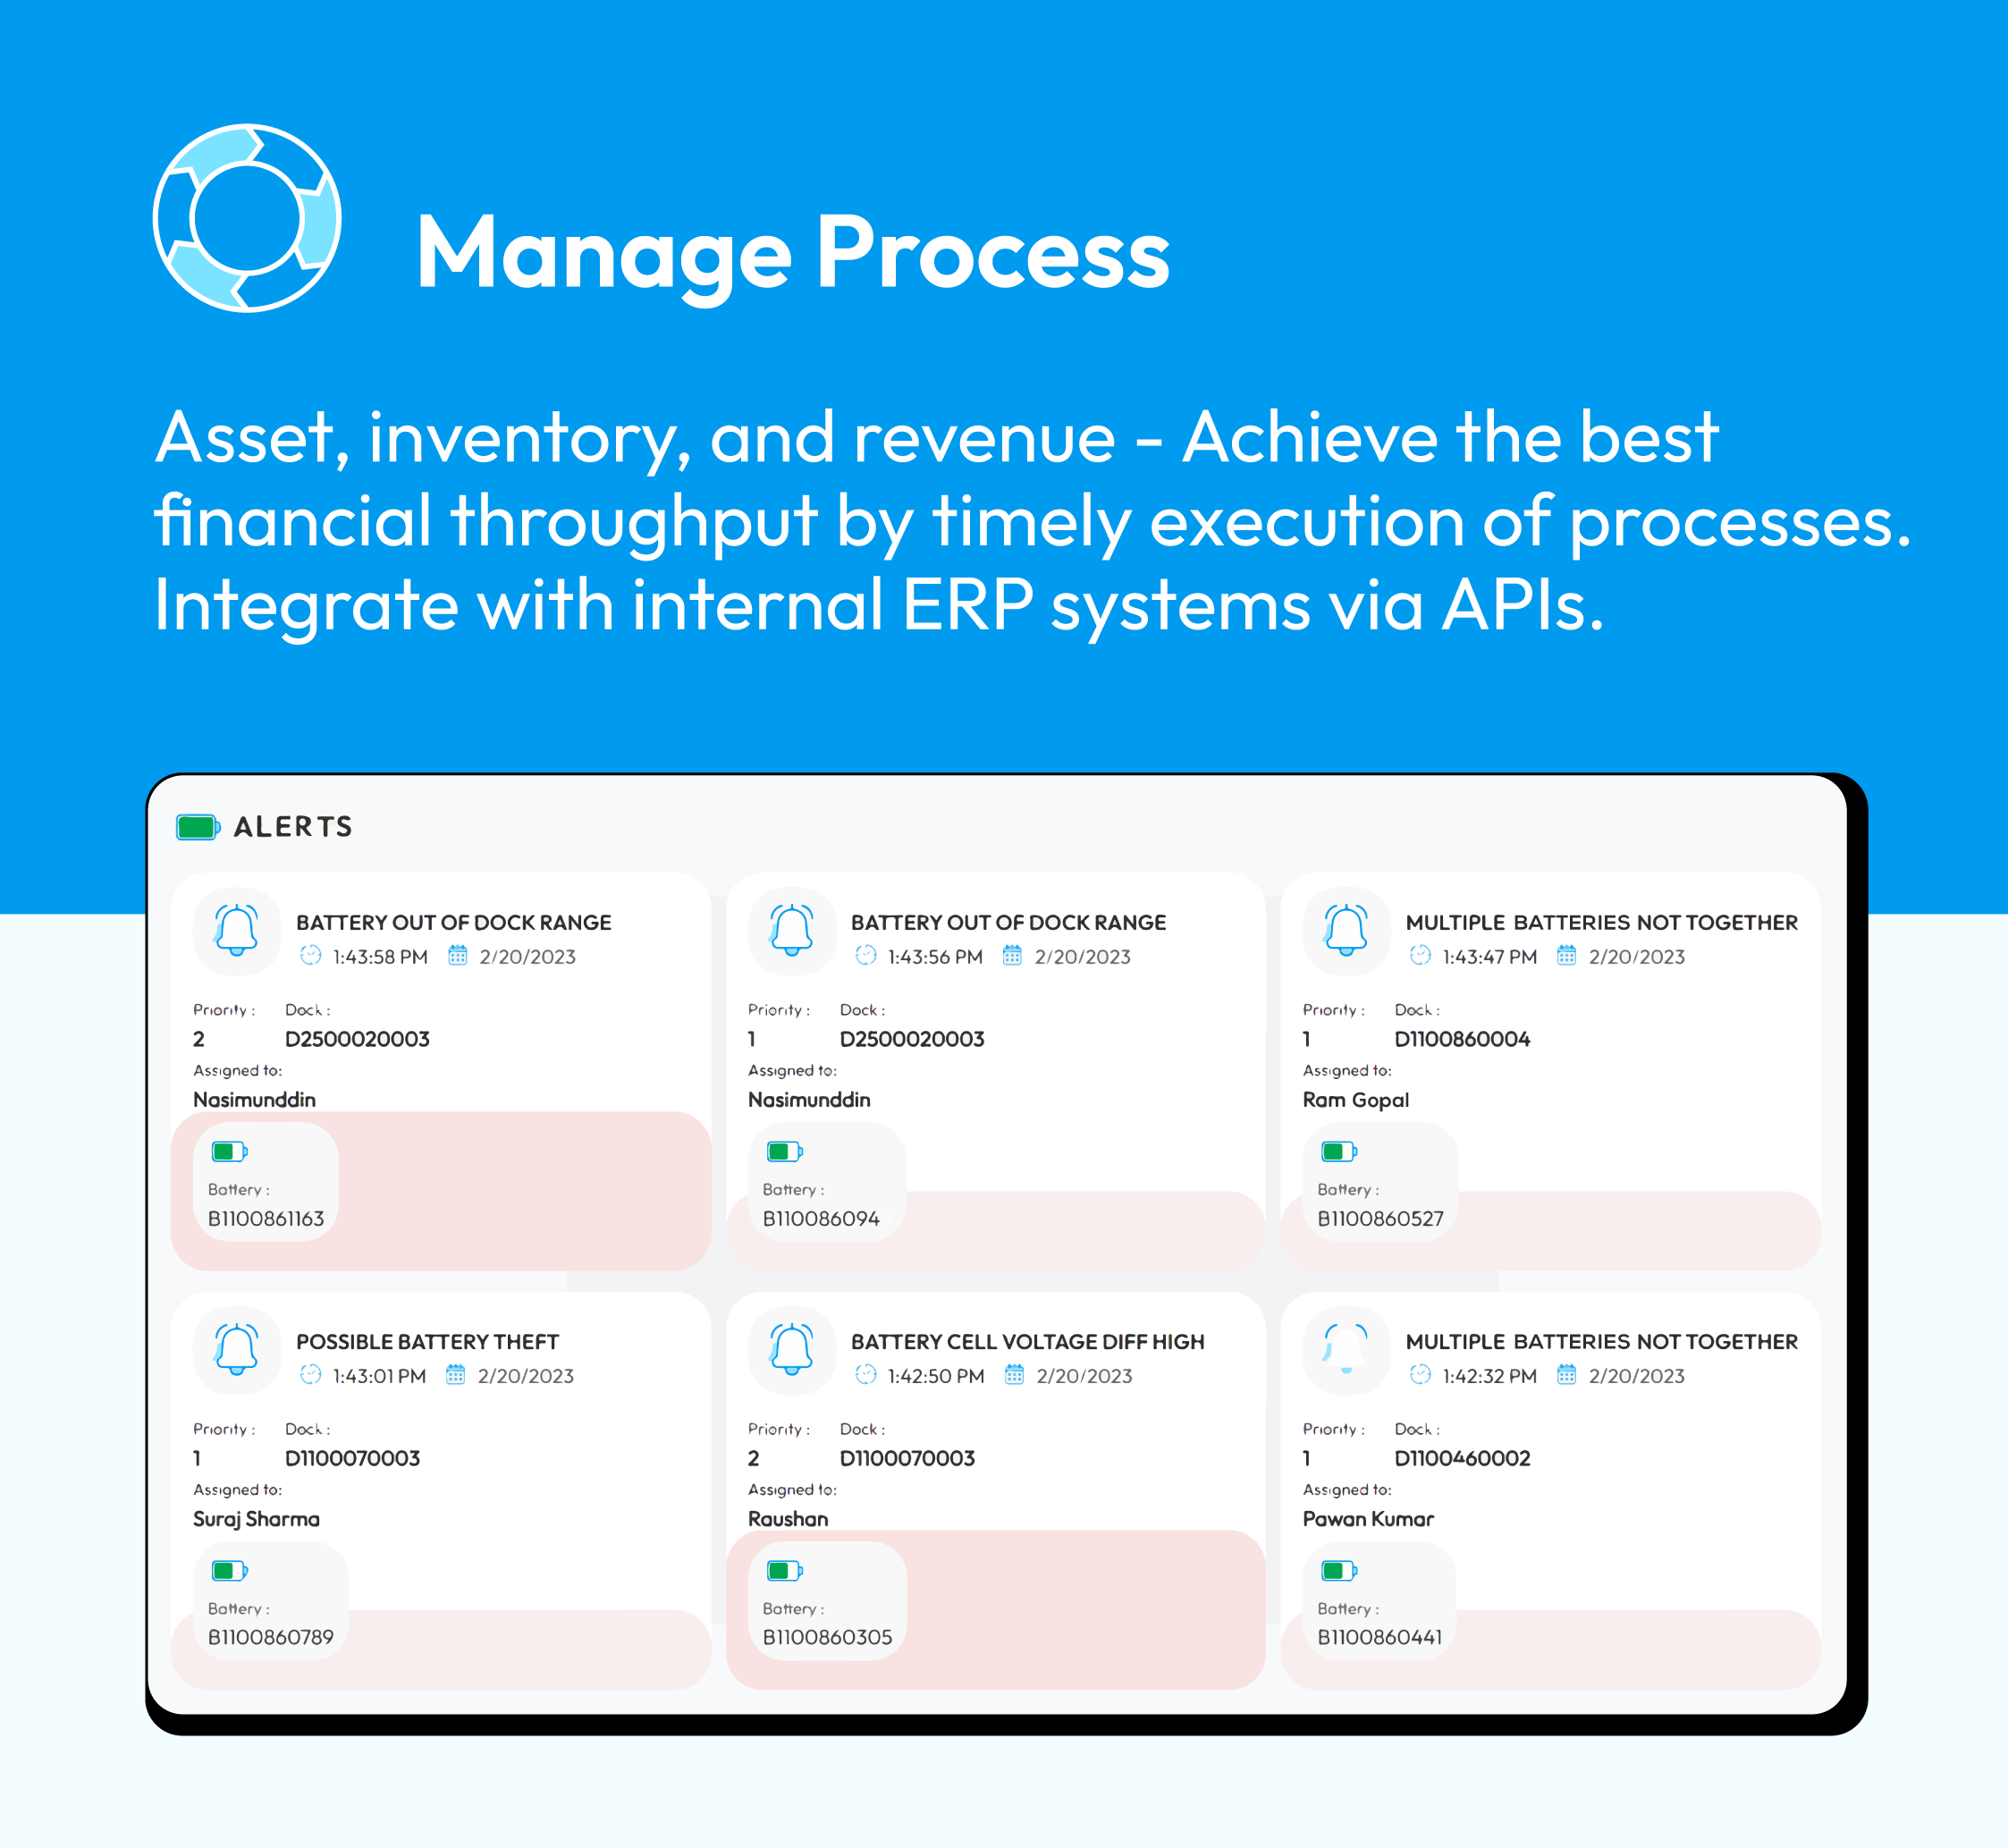 Manage process : Asset, inventory, and revenue. Achieve the best financial throughput by timely execution of processes. Integrate with internal ERP systems via APIs.